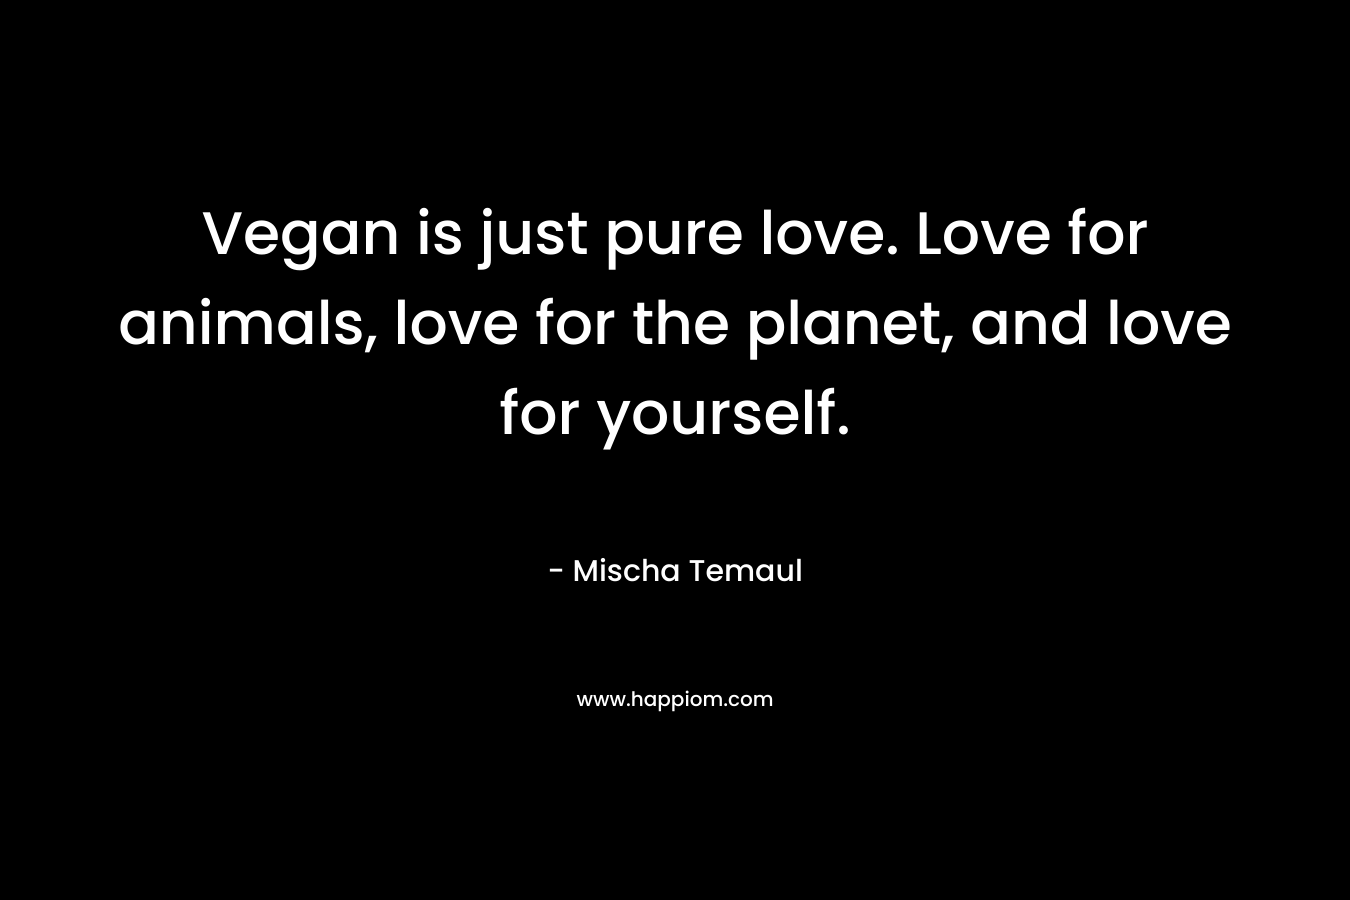 Vegan is just pure love. Love for animals, love for the planet, and love for yourself. – Mischa Temaul